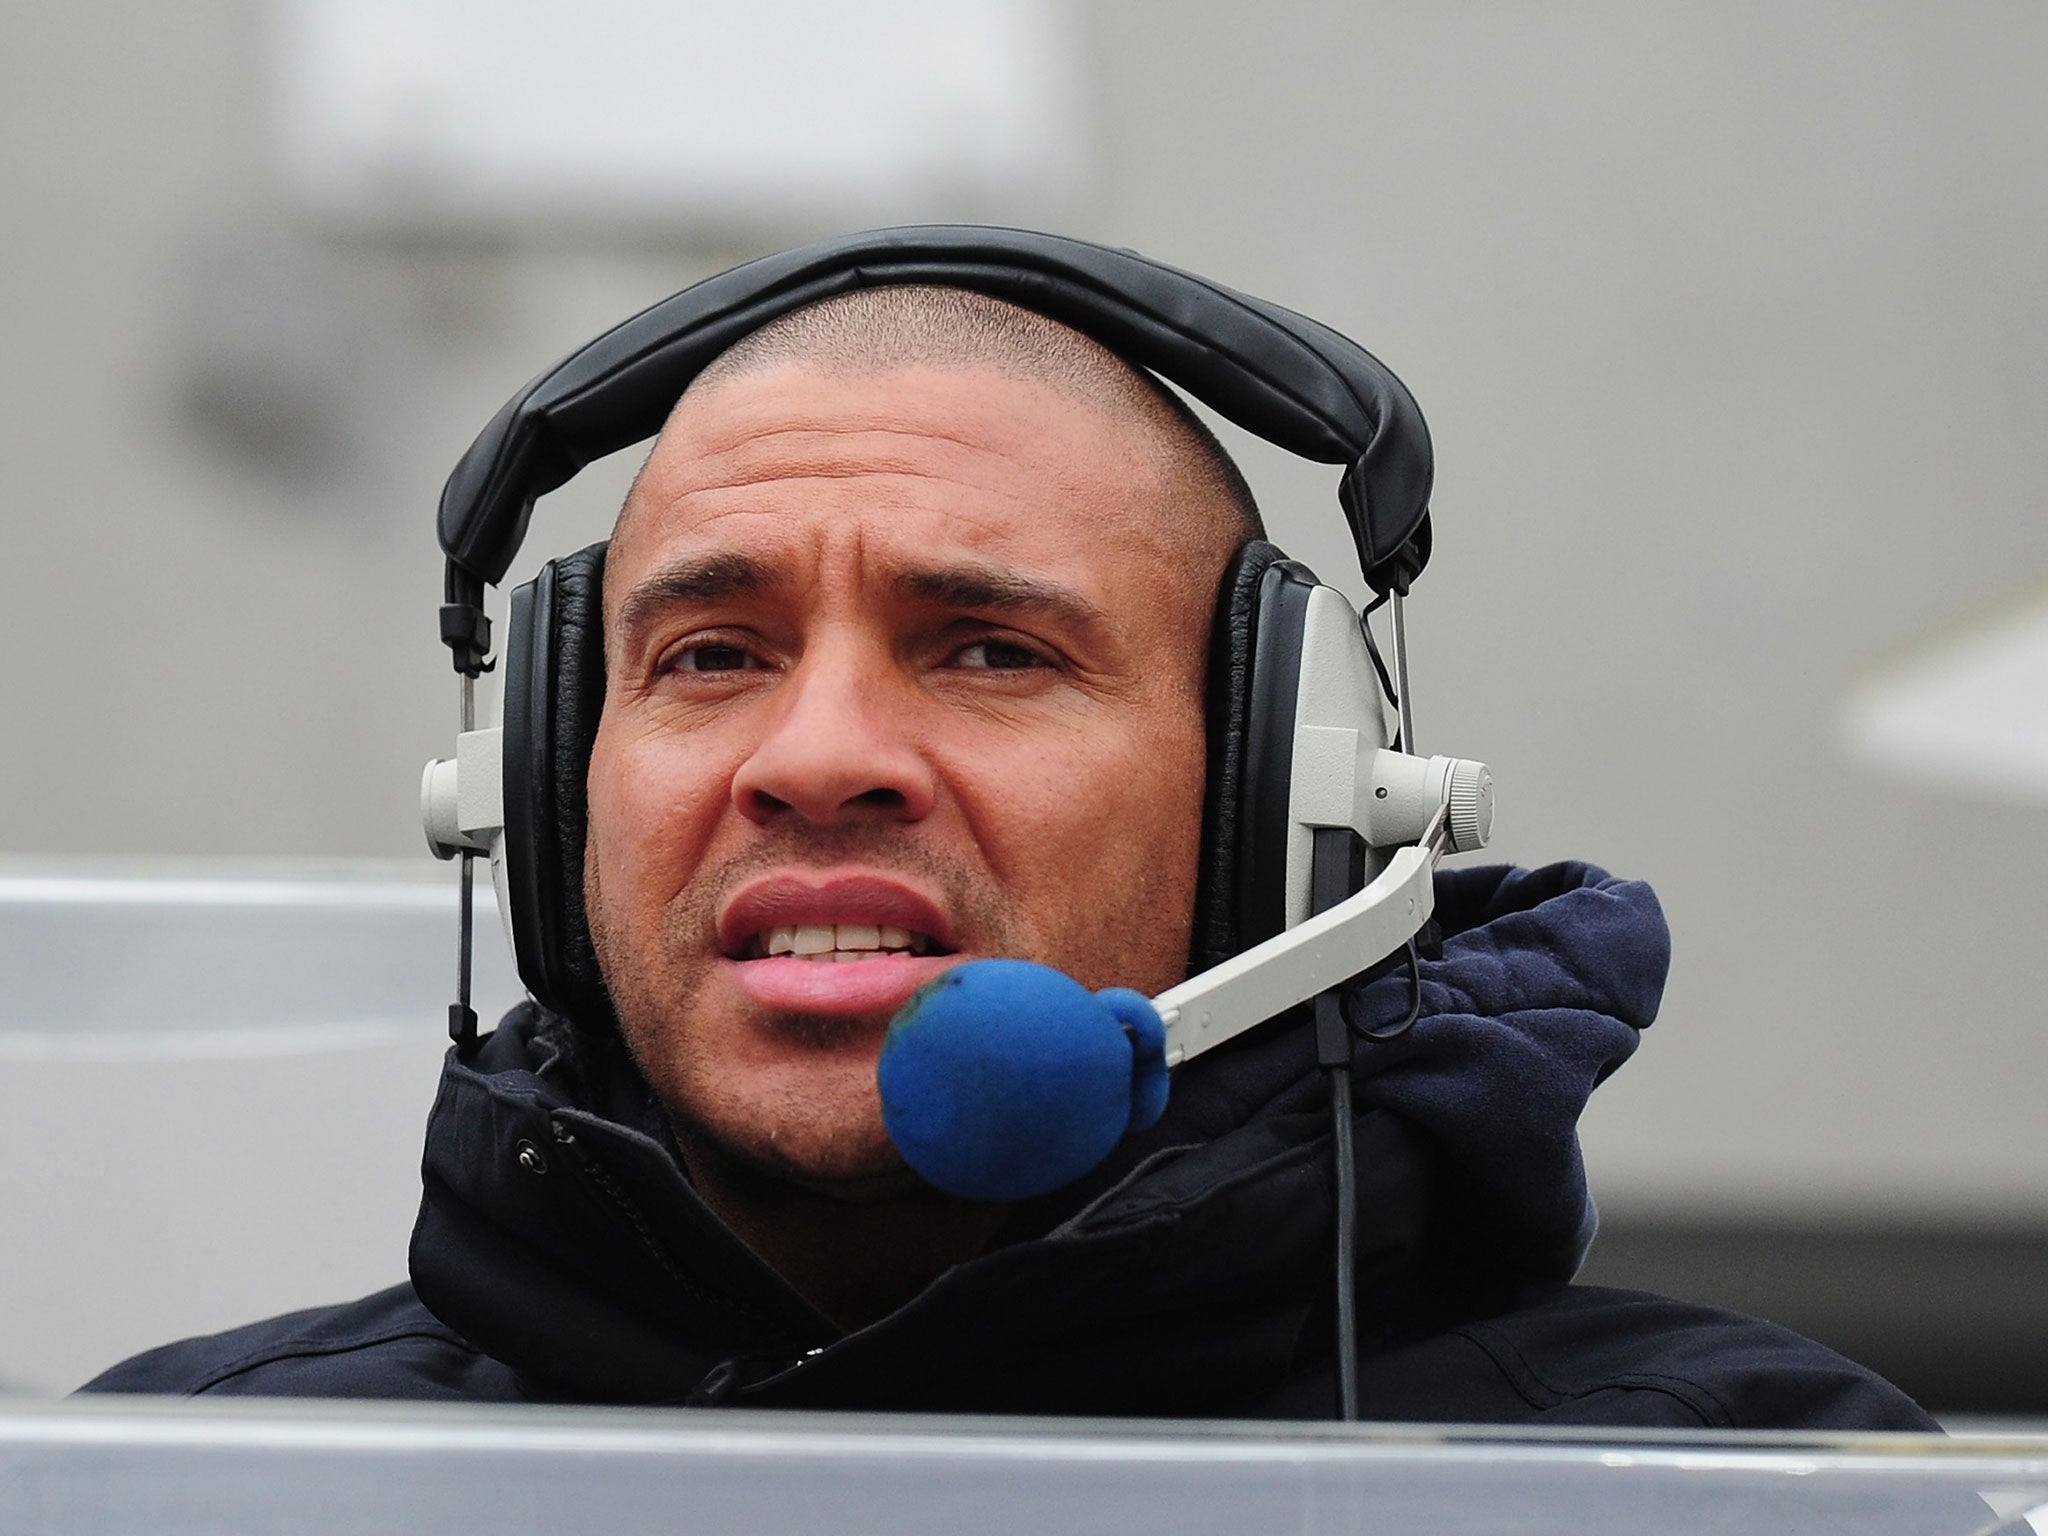 Collymore is now a member of the Scottish National Party